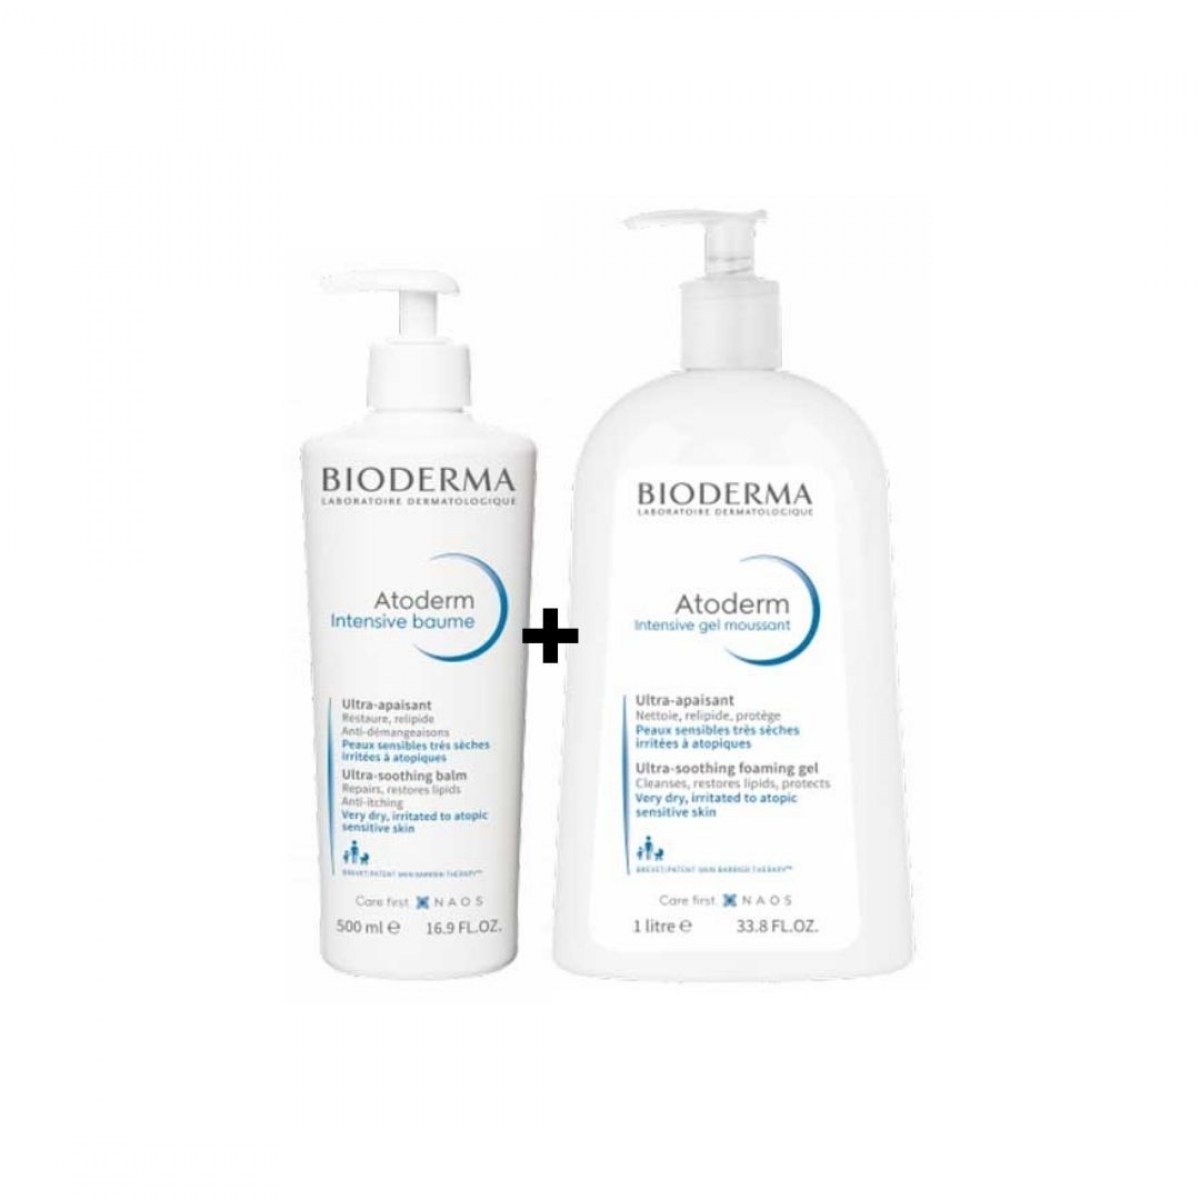 PACK ATODERM INTENSIVE BAUME 500ML + ATODERM INTENSIVE GEL MOUSSANT 1L